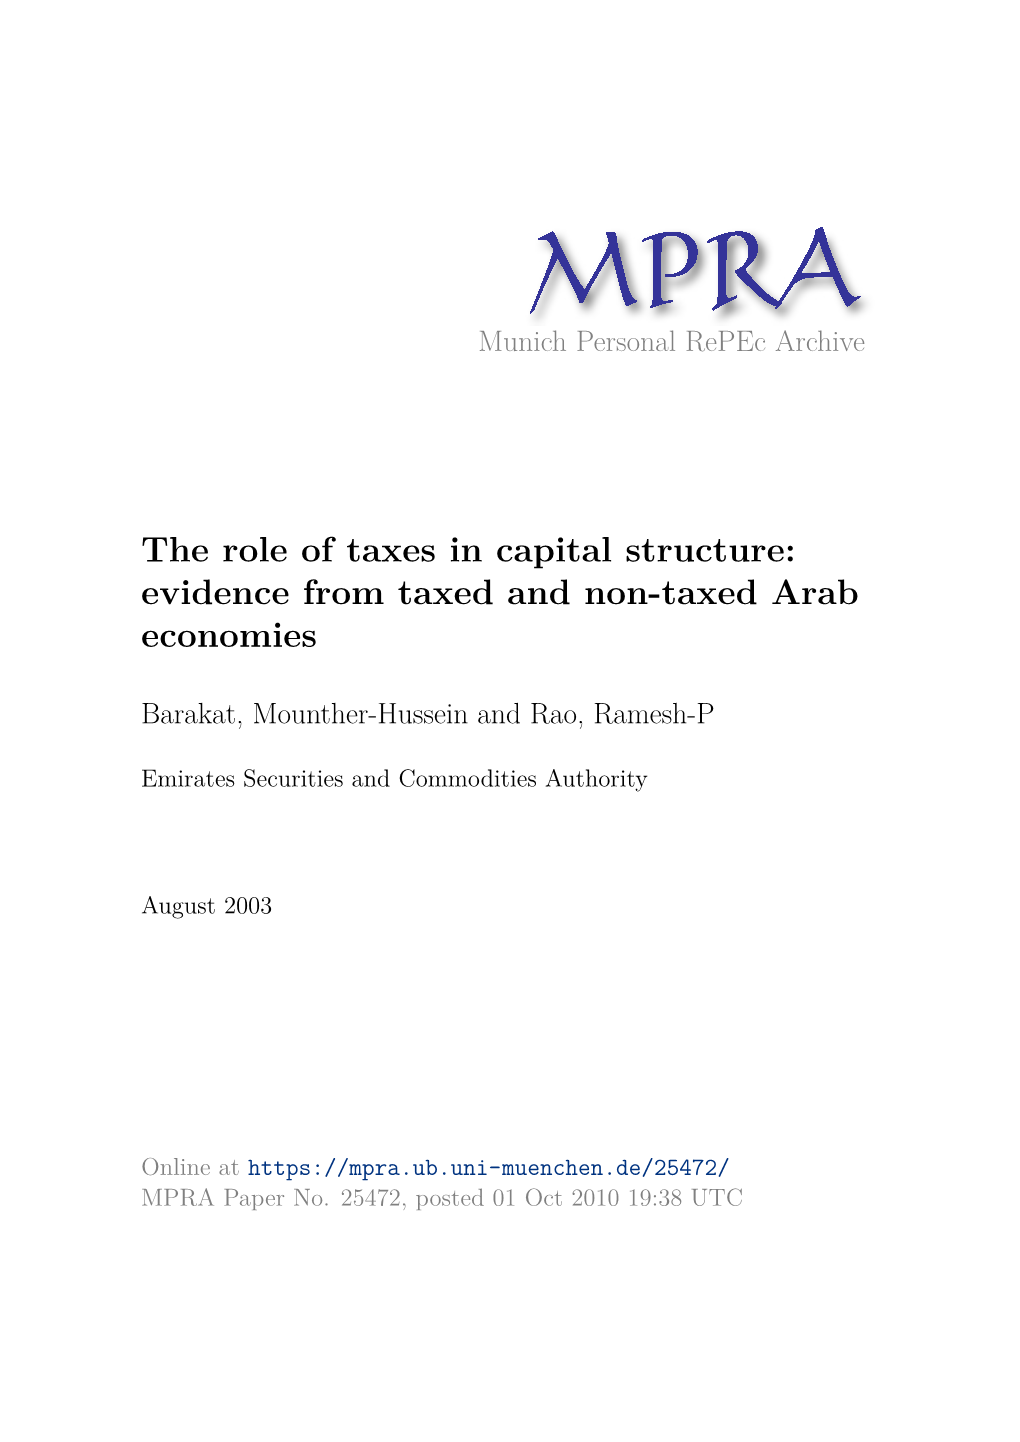 The Role of Taxes in Capital Structure: Evidence from Taxed and Non-Taxed Arab Economies